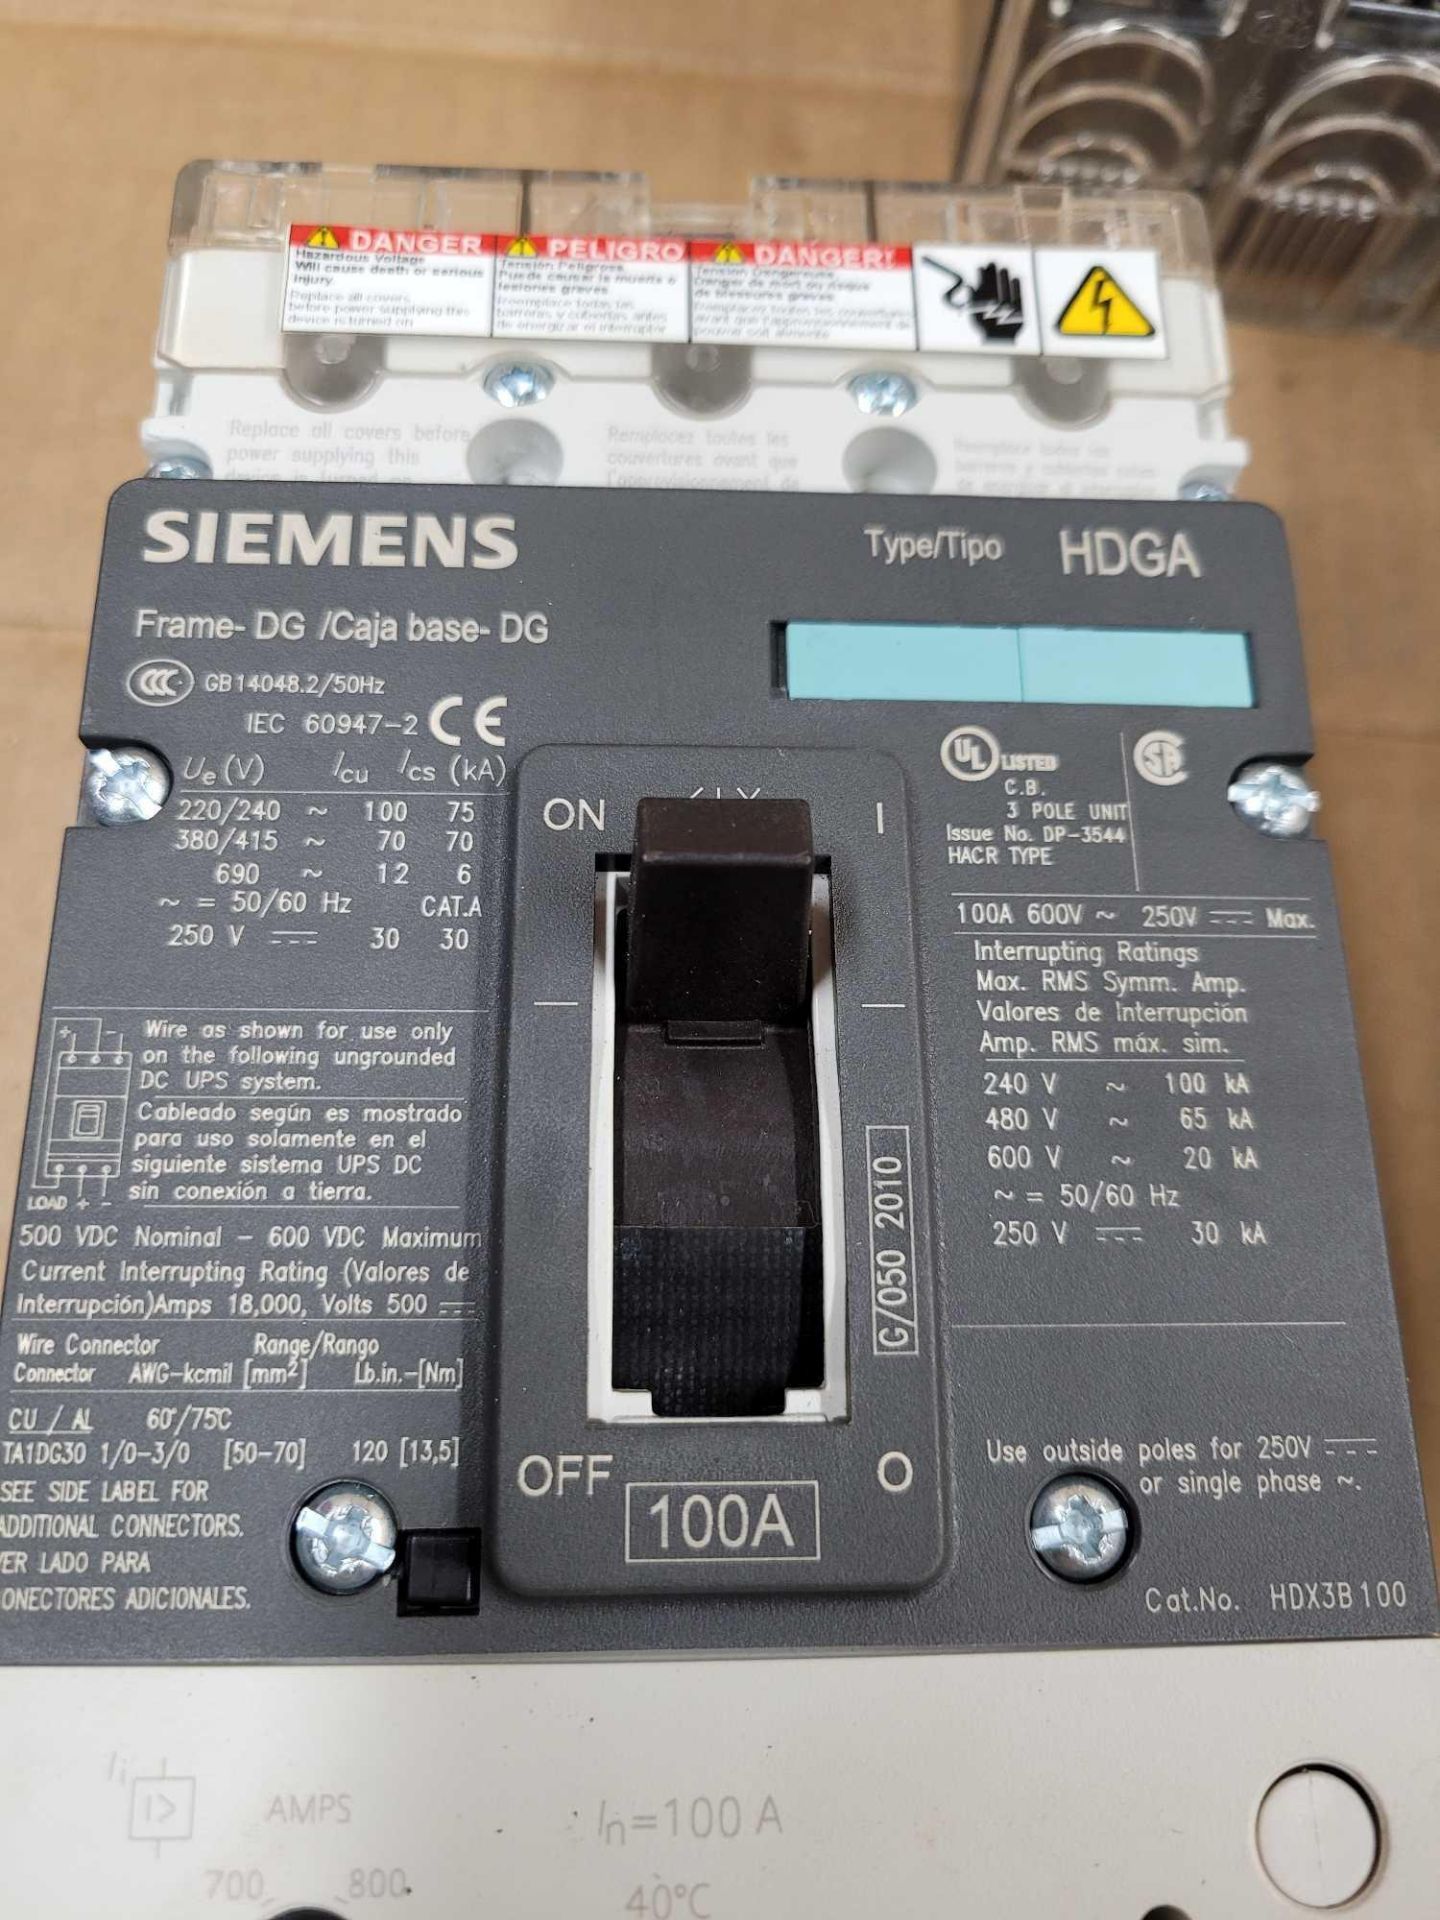 LOT OF 4 SIEMESN HDX3B100 / 100 Amp Circuit Breaker  /  Lot Weight: 19.2 lbs - Image 2 of 7